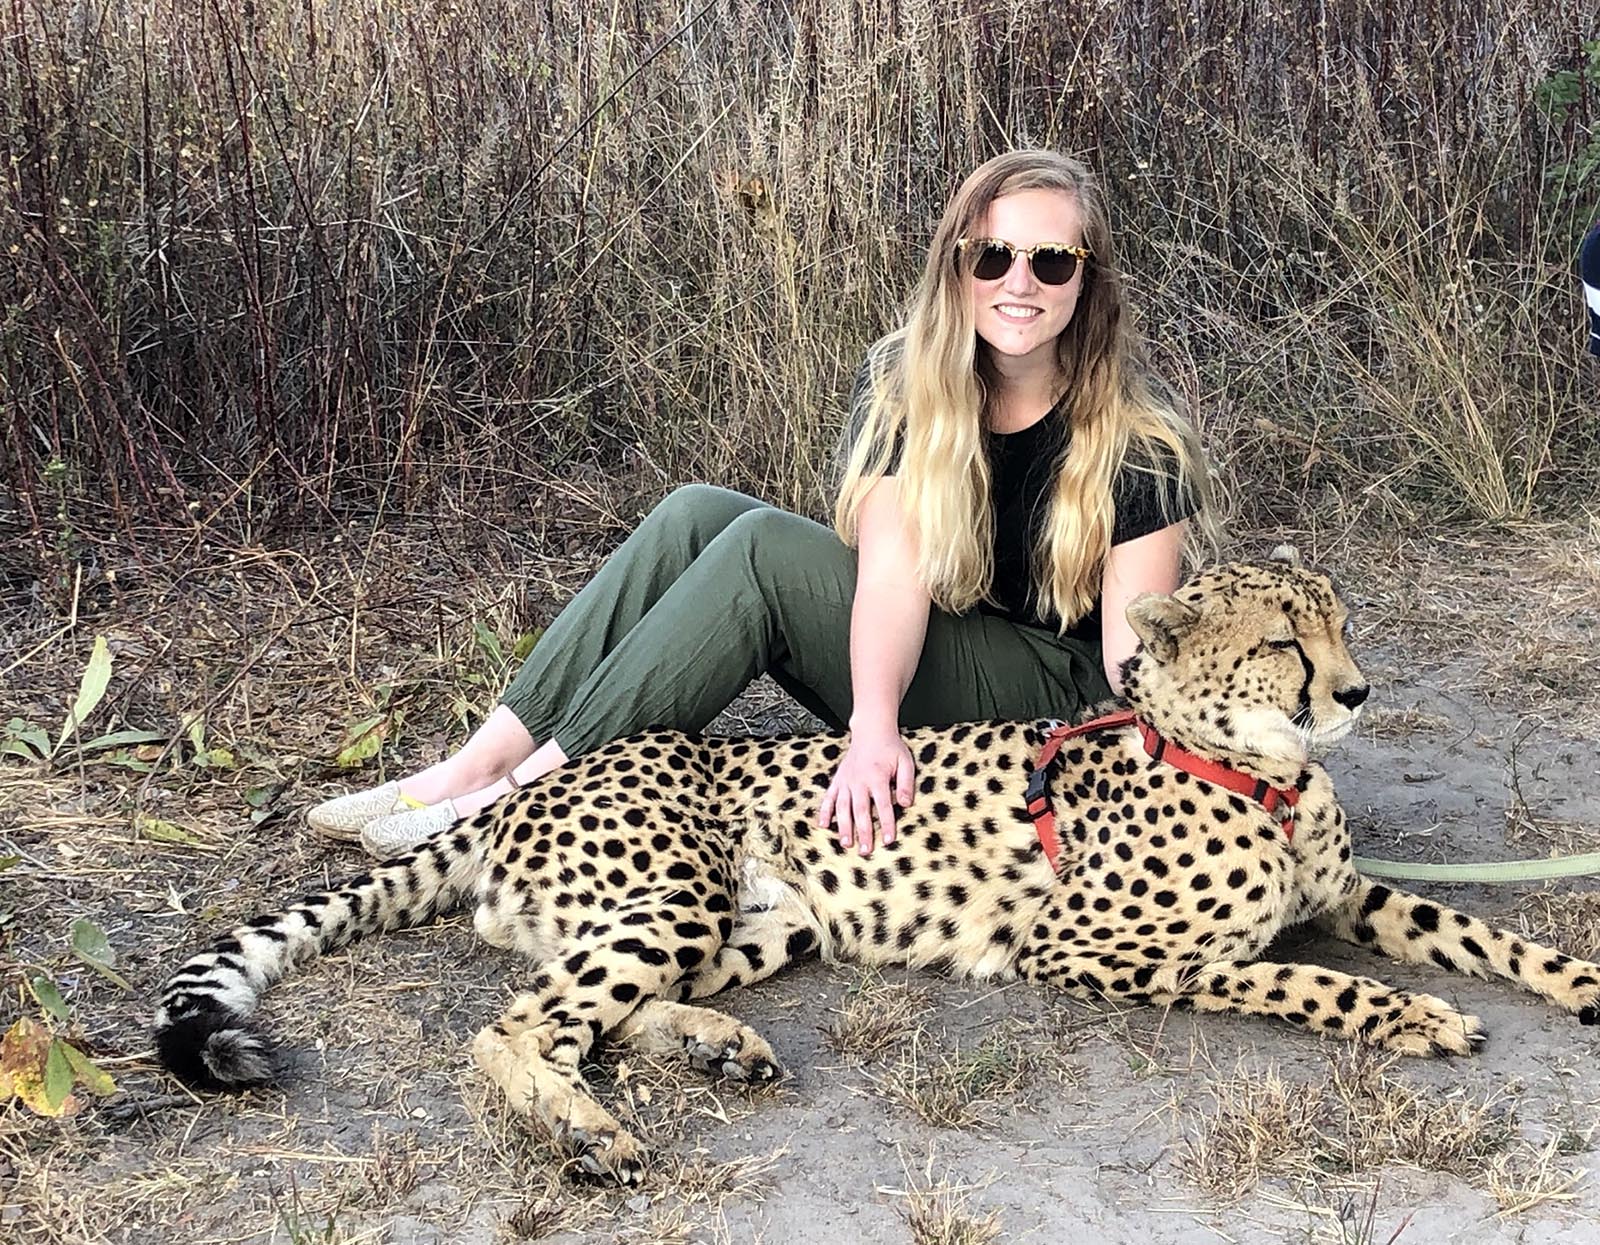 UNK graduate Tessa Copp poses for a photo with a cheetah during a recent trip to Zambia. (Courtesy photo)